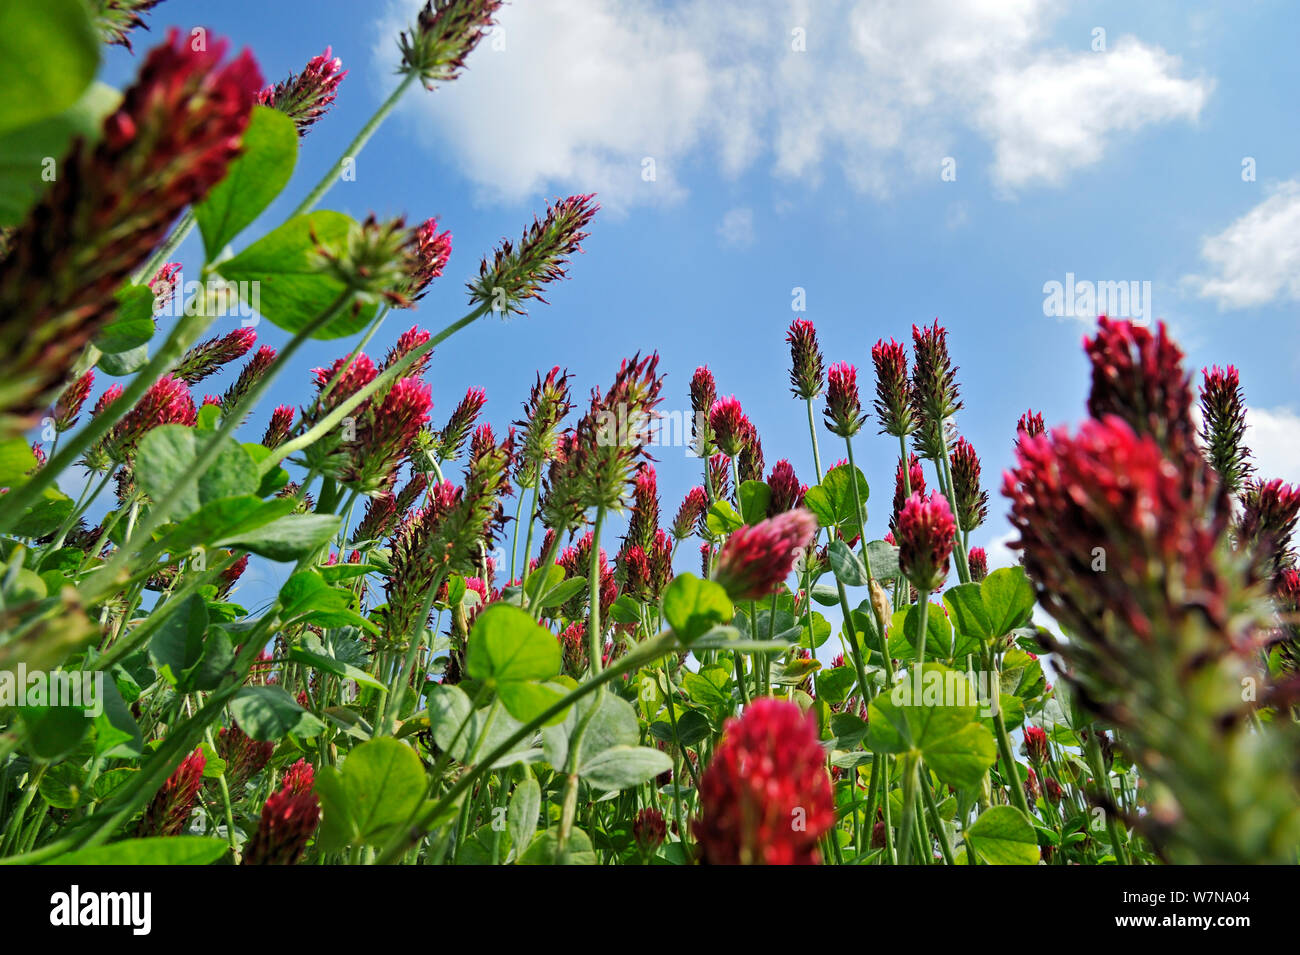 Crimson clover (Trifolium incarnatum) low angle view of field cultivated as fodder, La Brenne, France Stock Photo